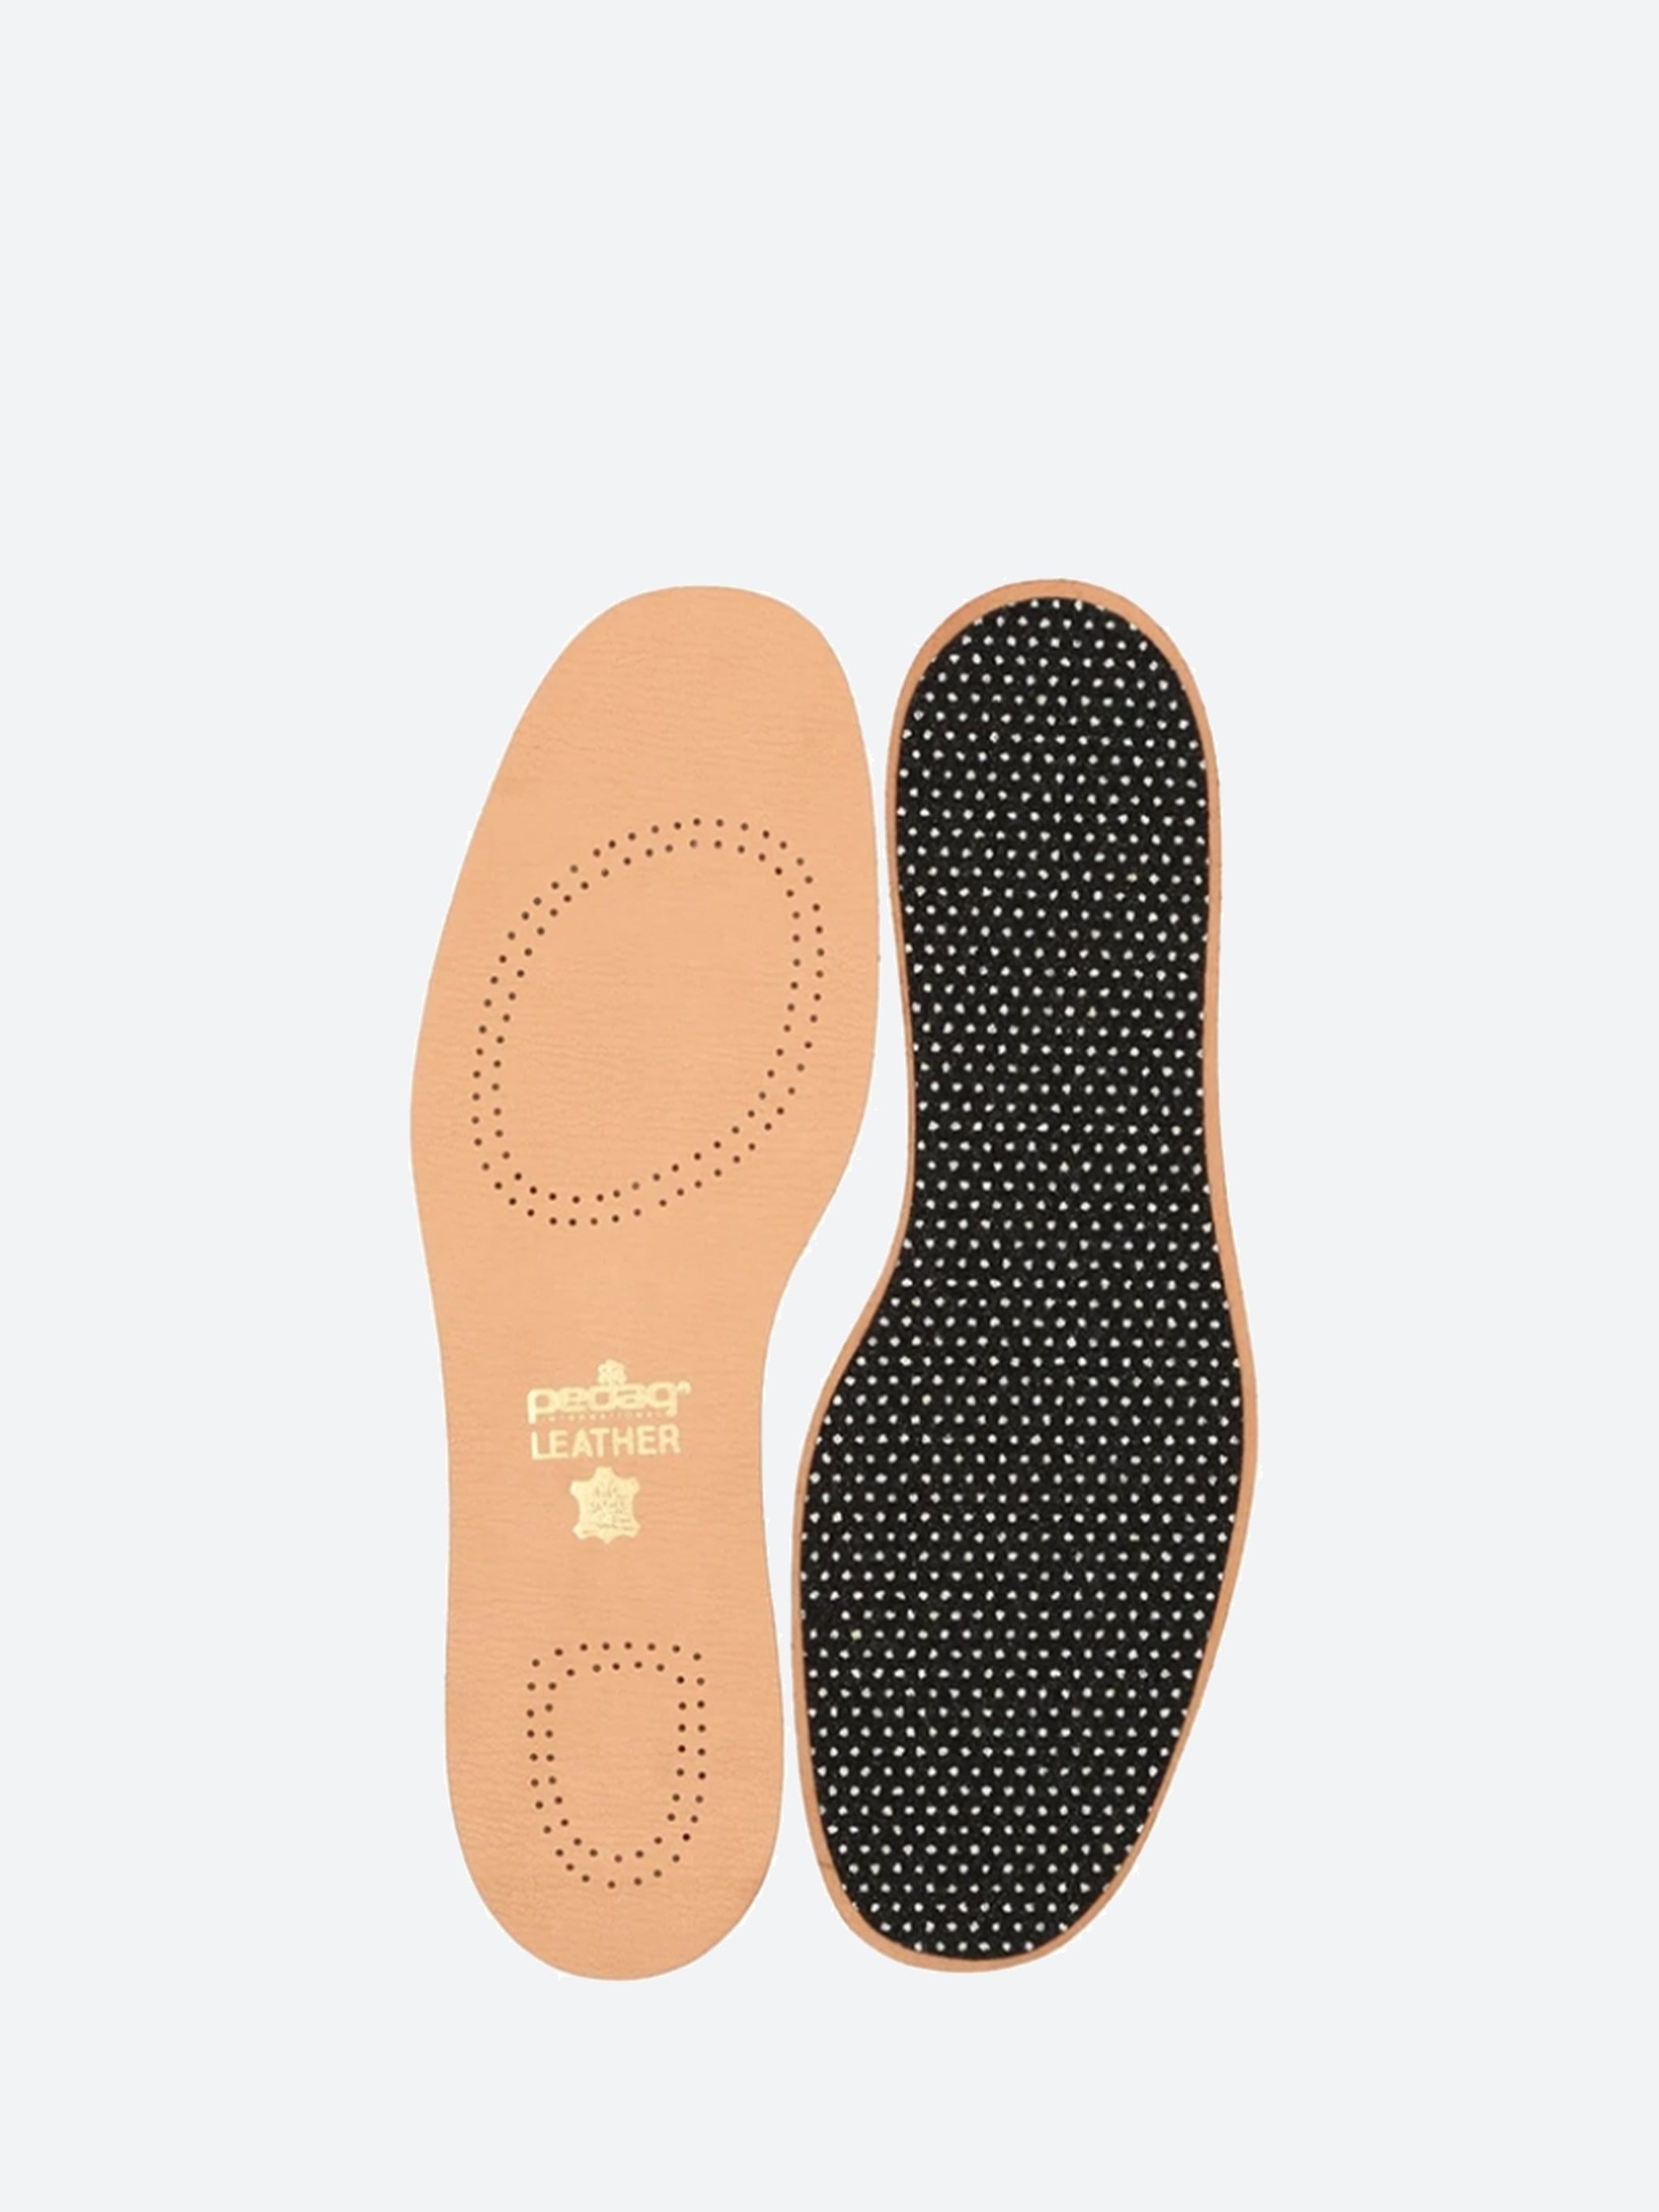 Natural Leather Insole